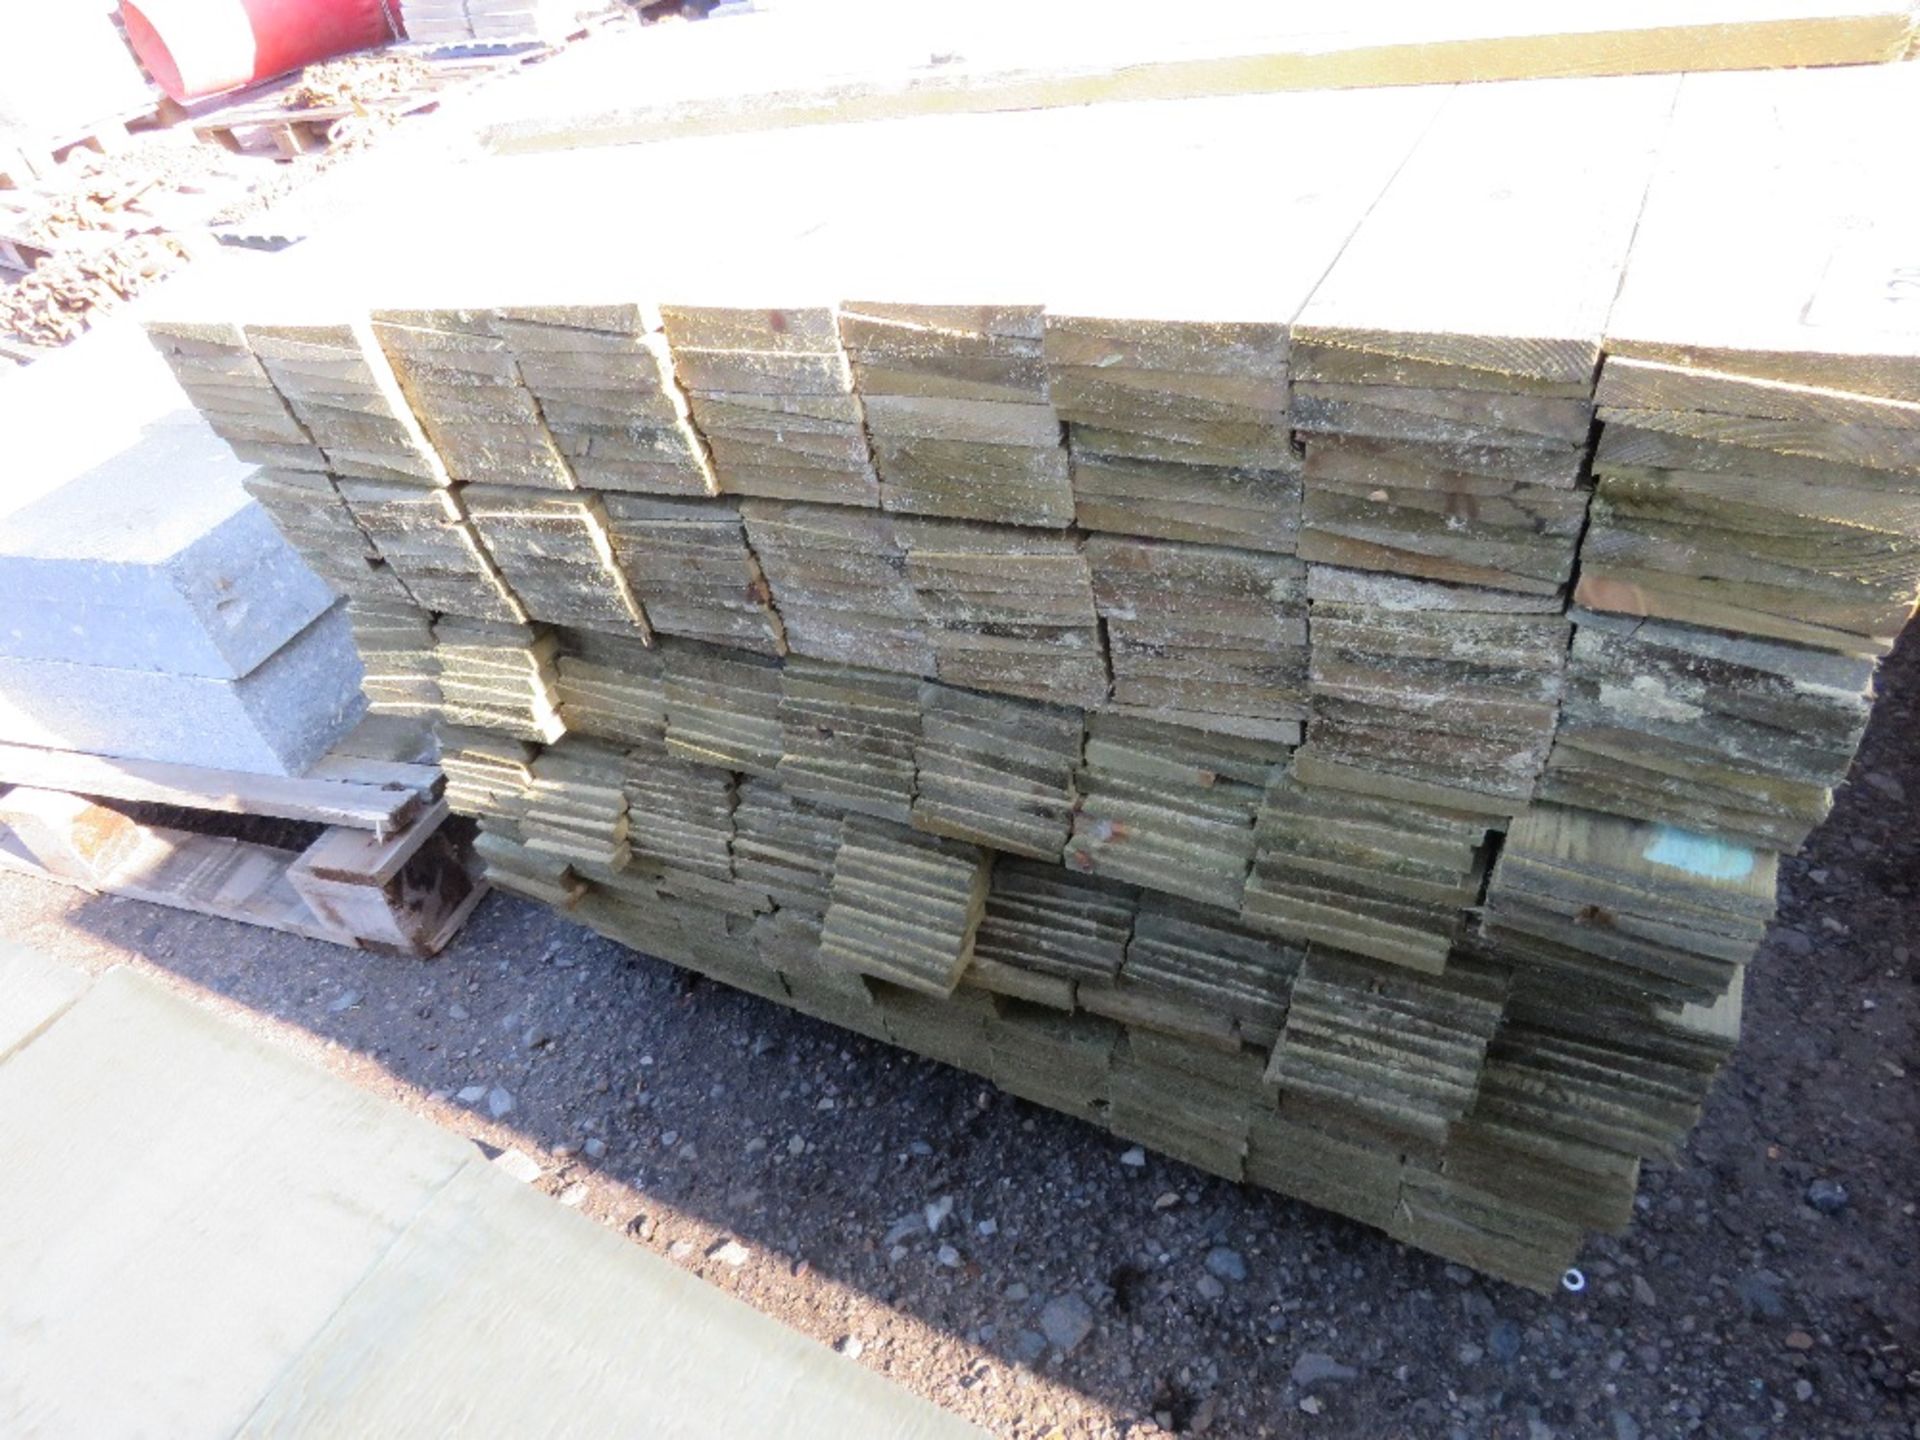 LARGE PACK OF PRESSURE TREATED FEATHER EDGE CLADDING TIMBER. LENGTH 1.35M X 100MM WIDTH APPROX. - Image 2 of 3